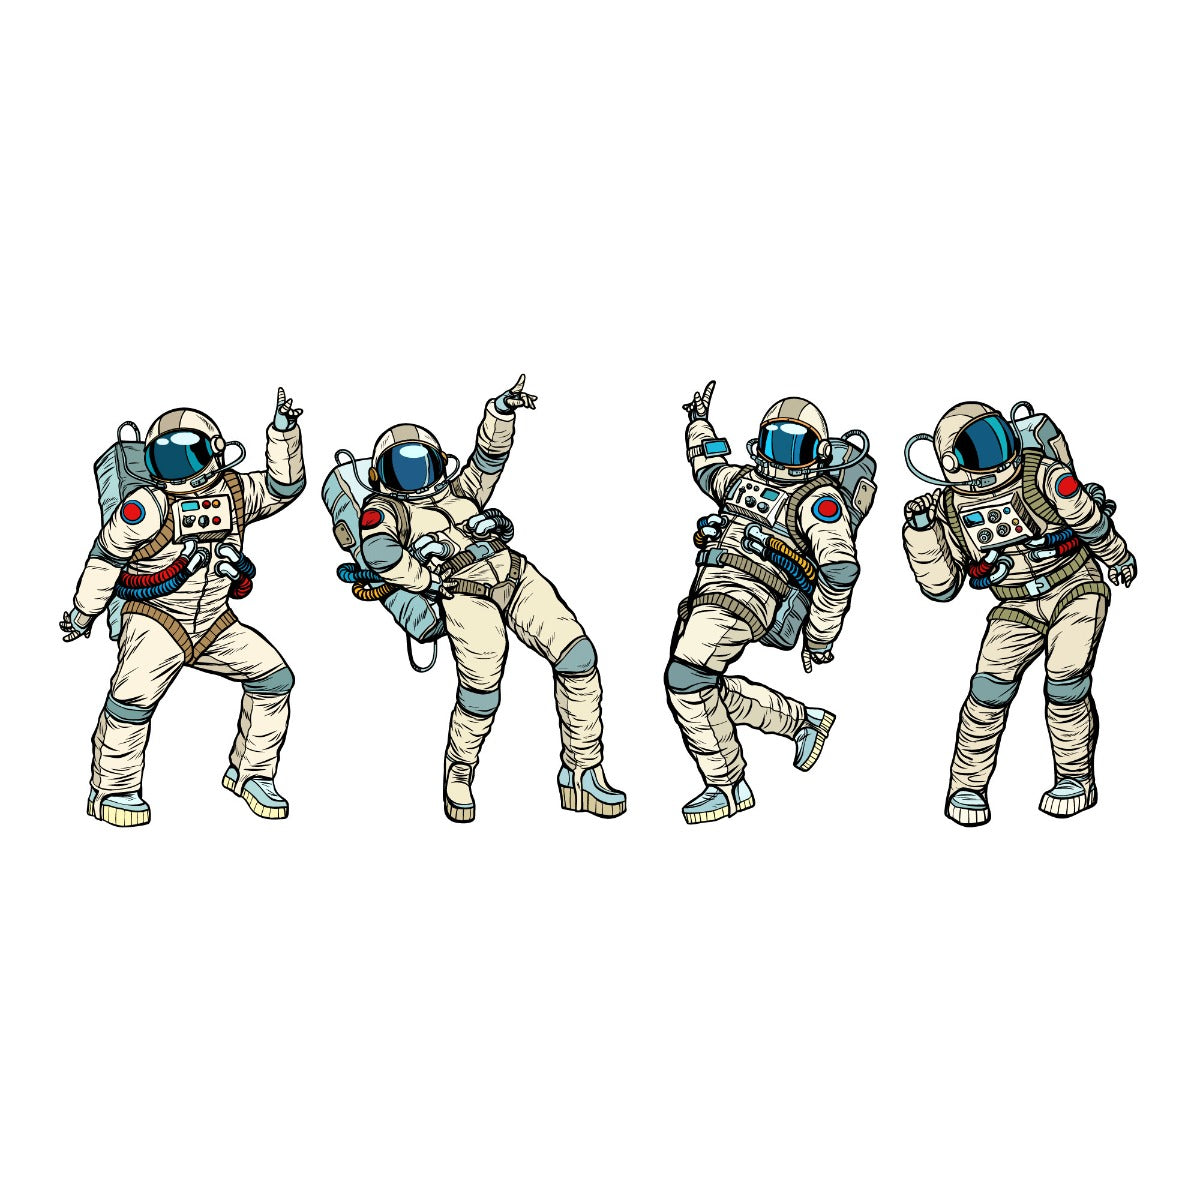 Space Wall Sticker - Dancing Astronauts Set of 4